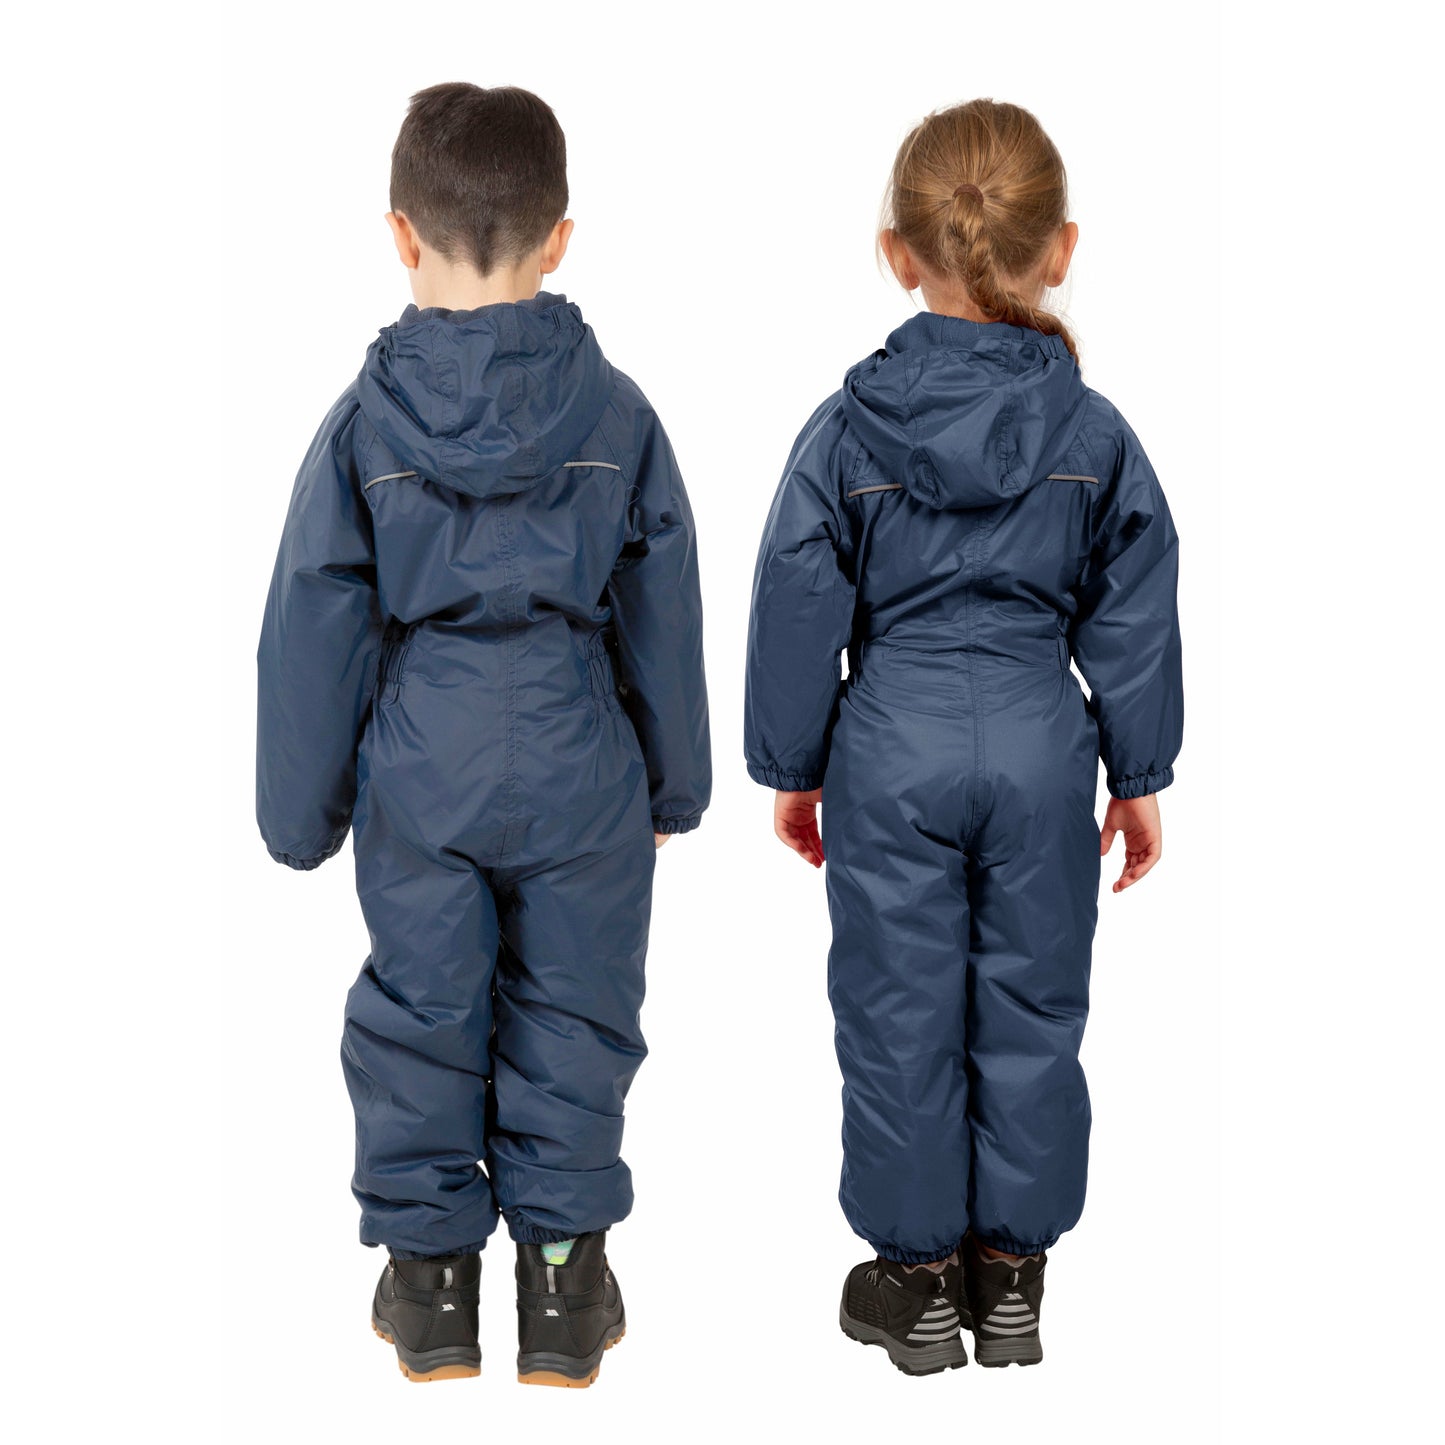 DripDrop Childs Padded Waterproof Puddle Suit in Navy